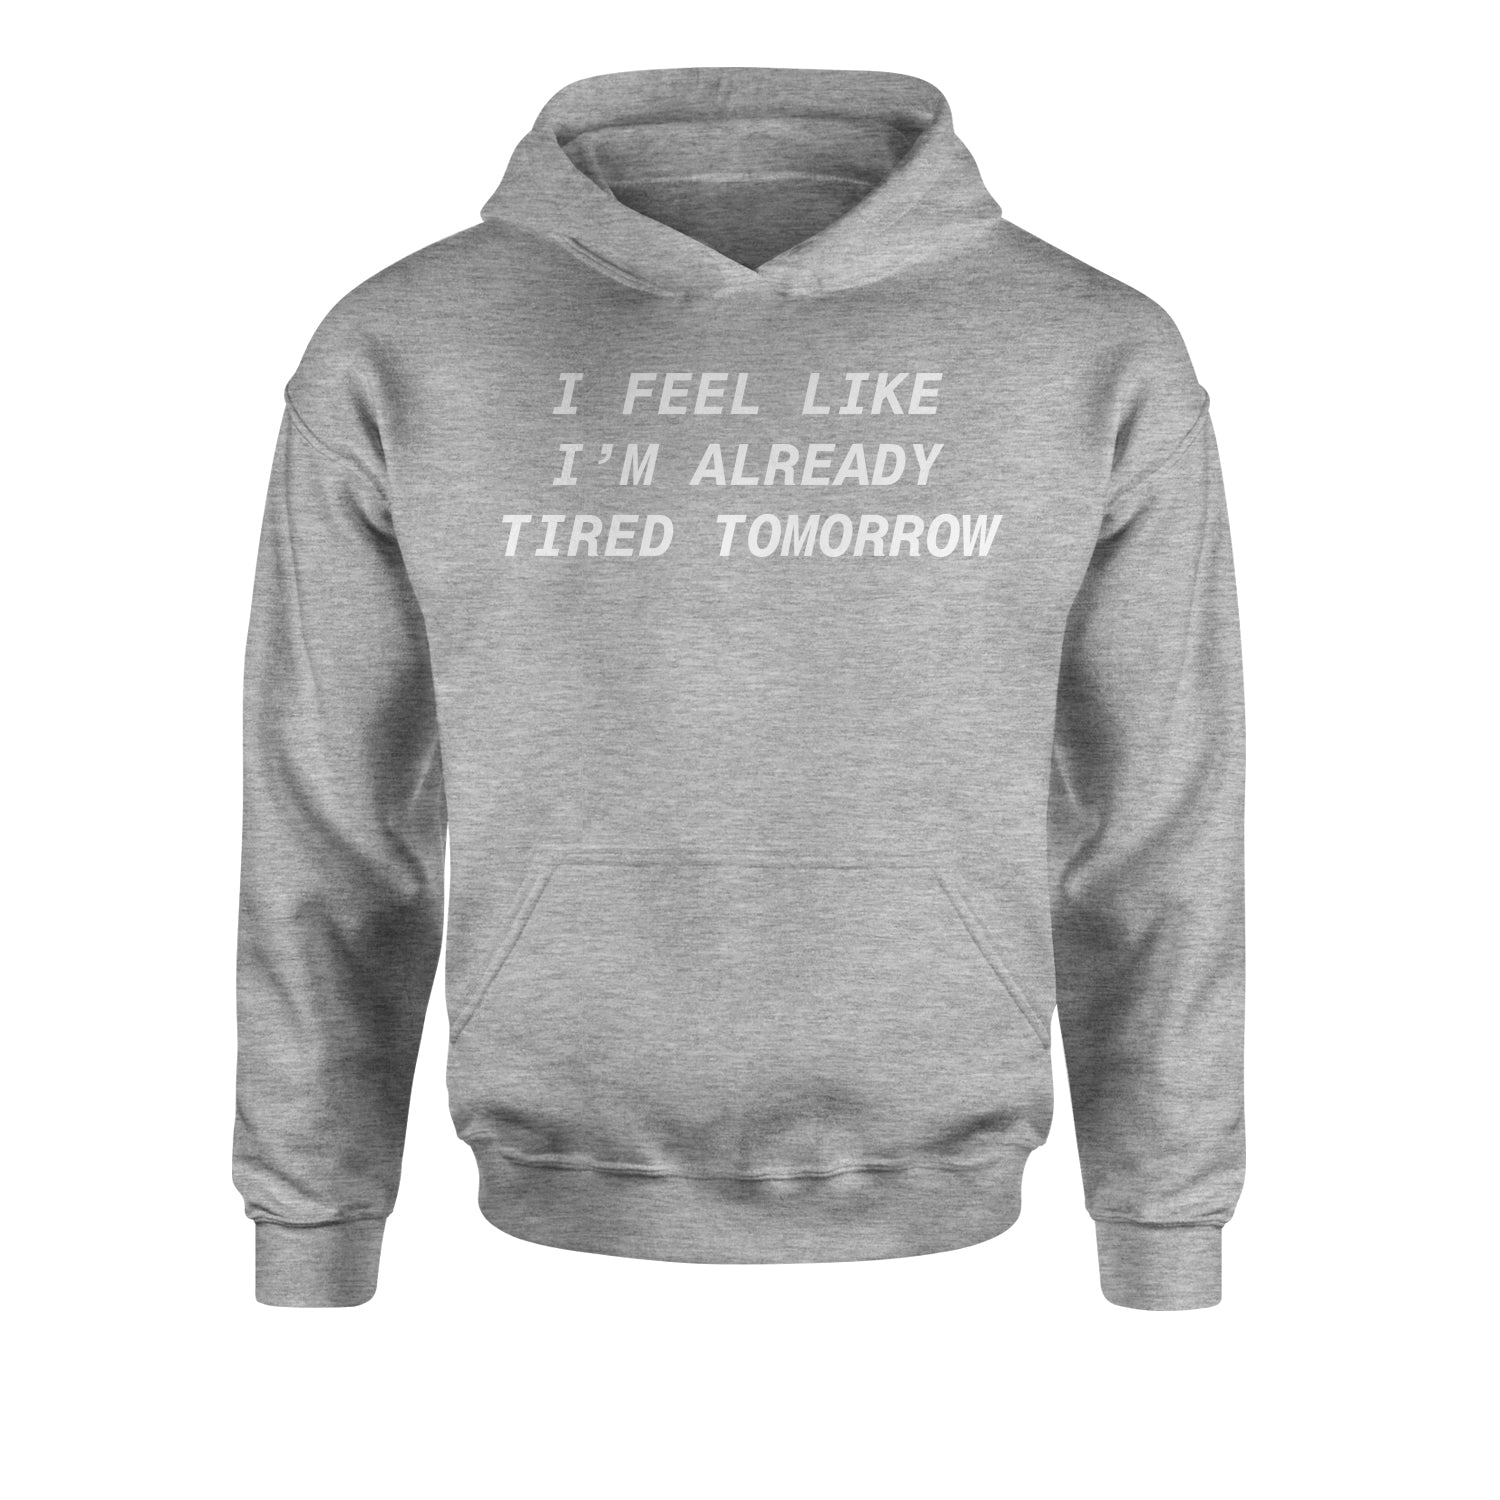 I Feel Like I'm Already Tired Tomorrow Youth-Sized Hoodie #expressiontees by Expression Tees